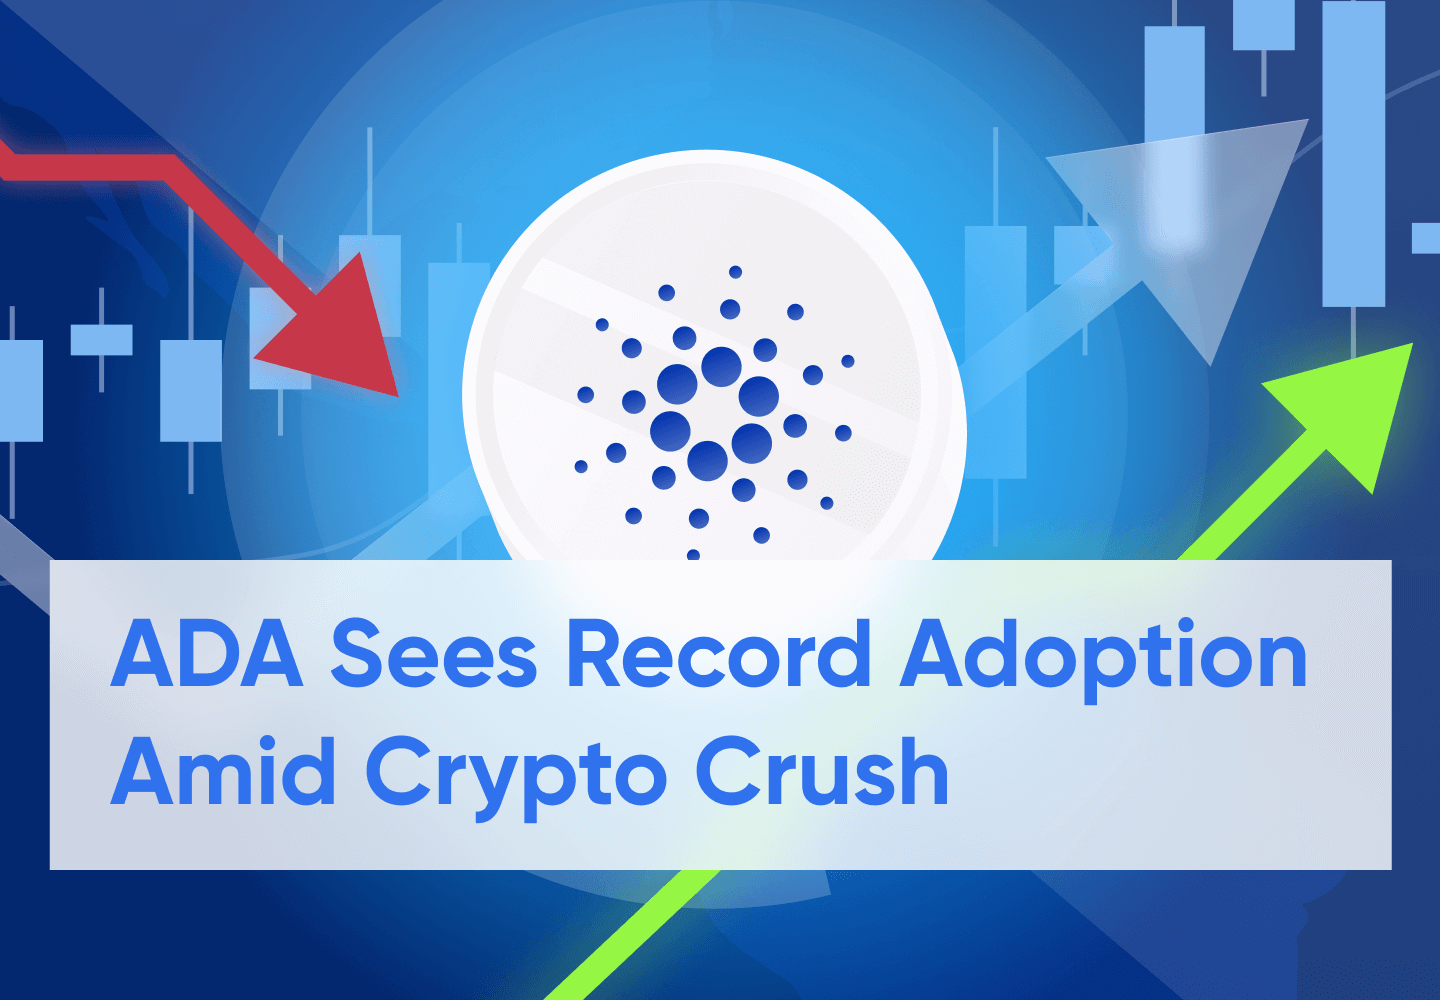 Cardano New Wallet Count Grows at Record Pace Amid Crypto Market Crash